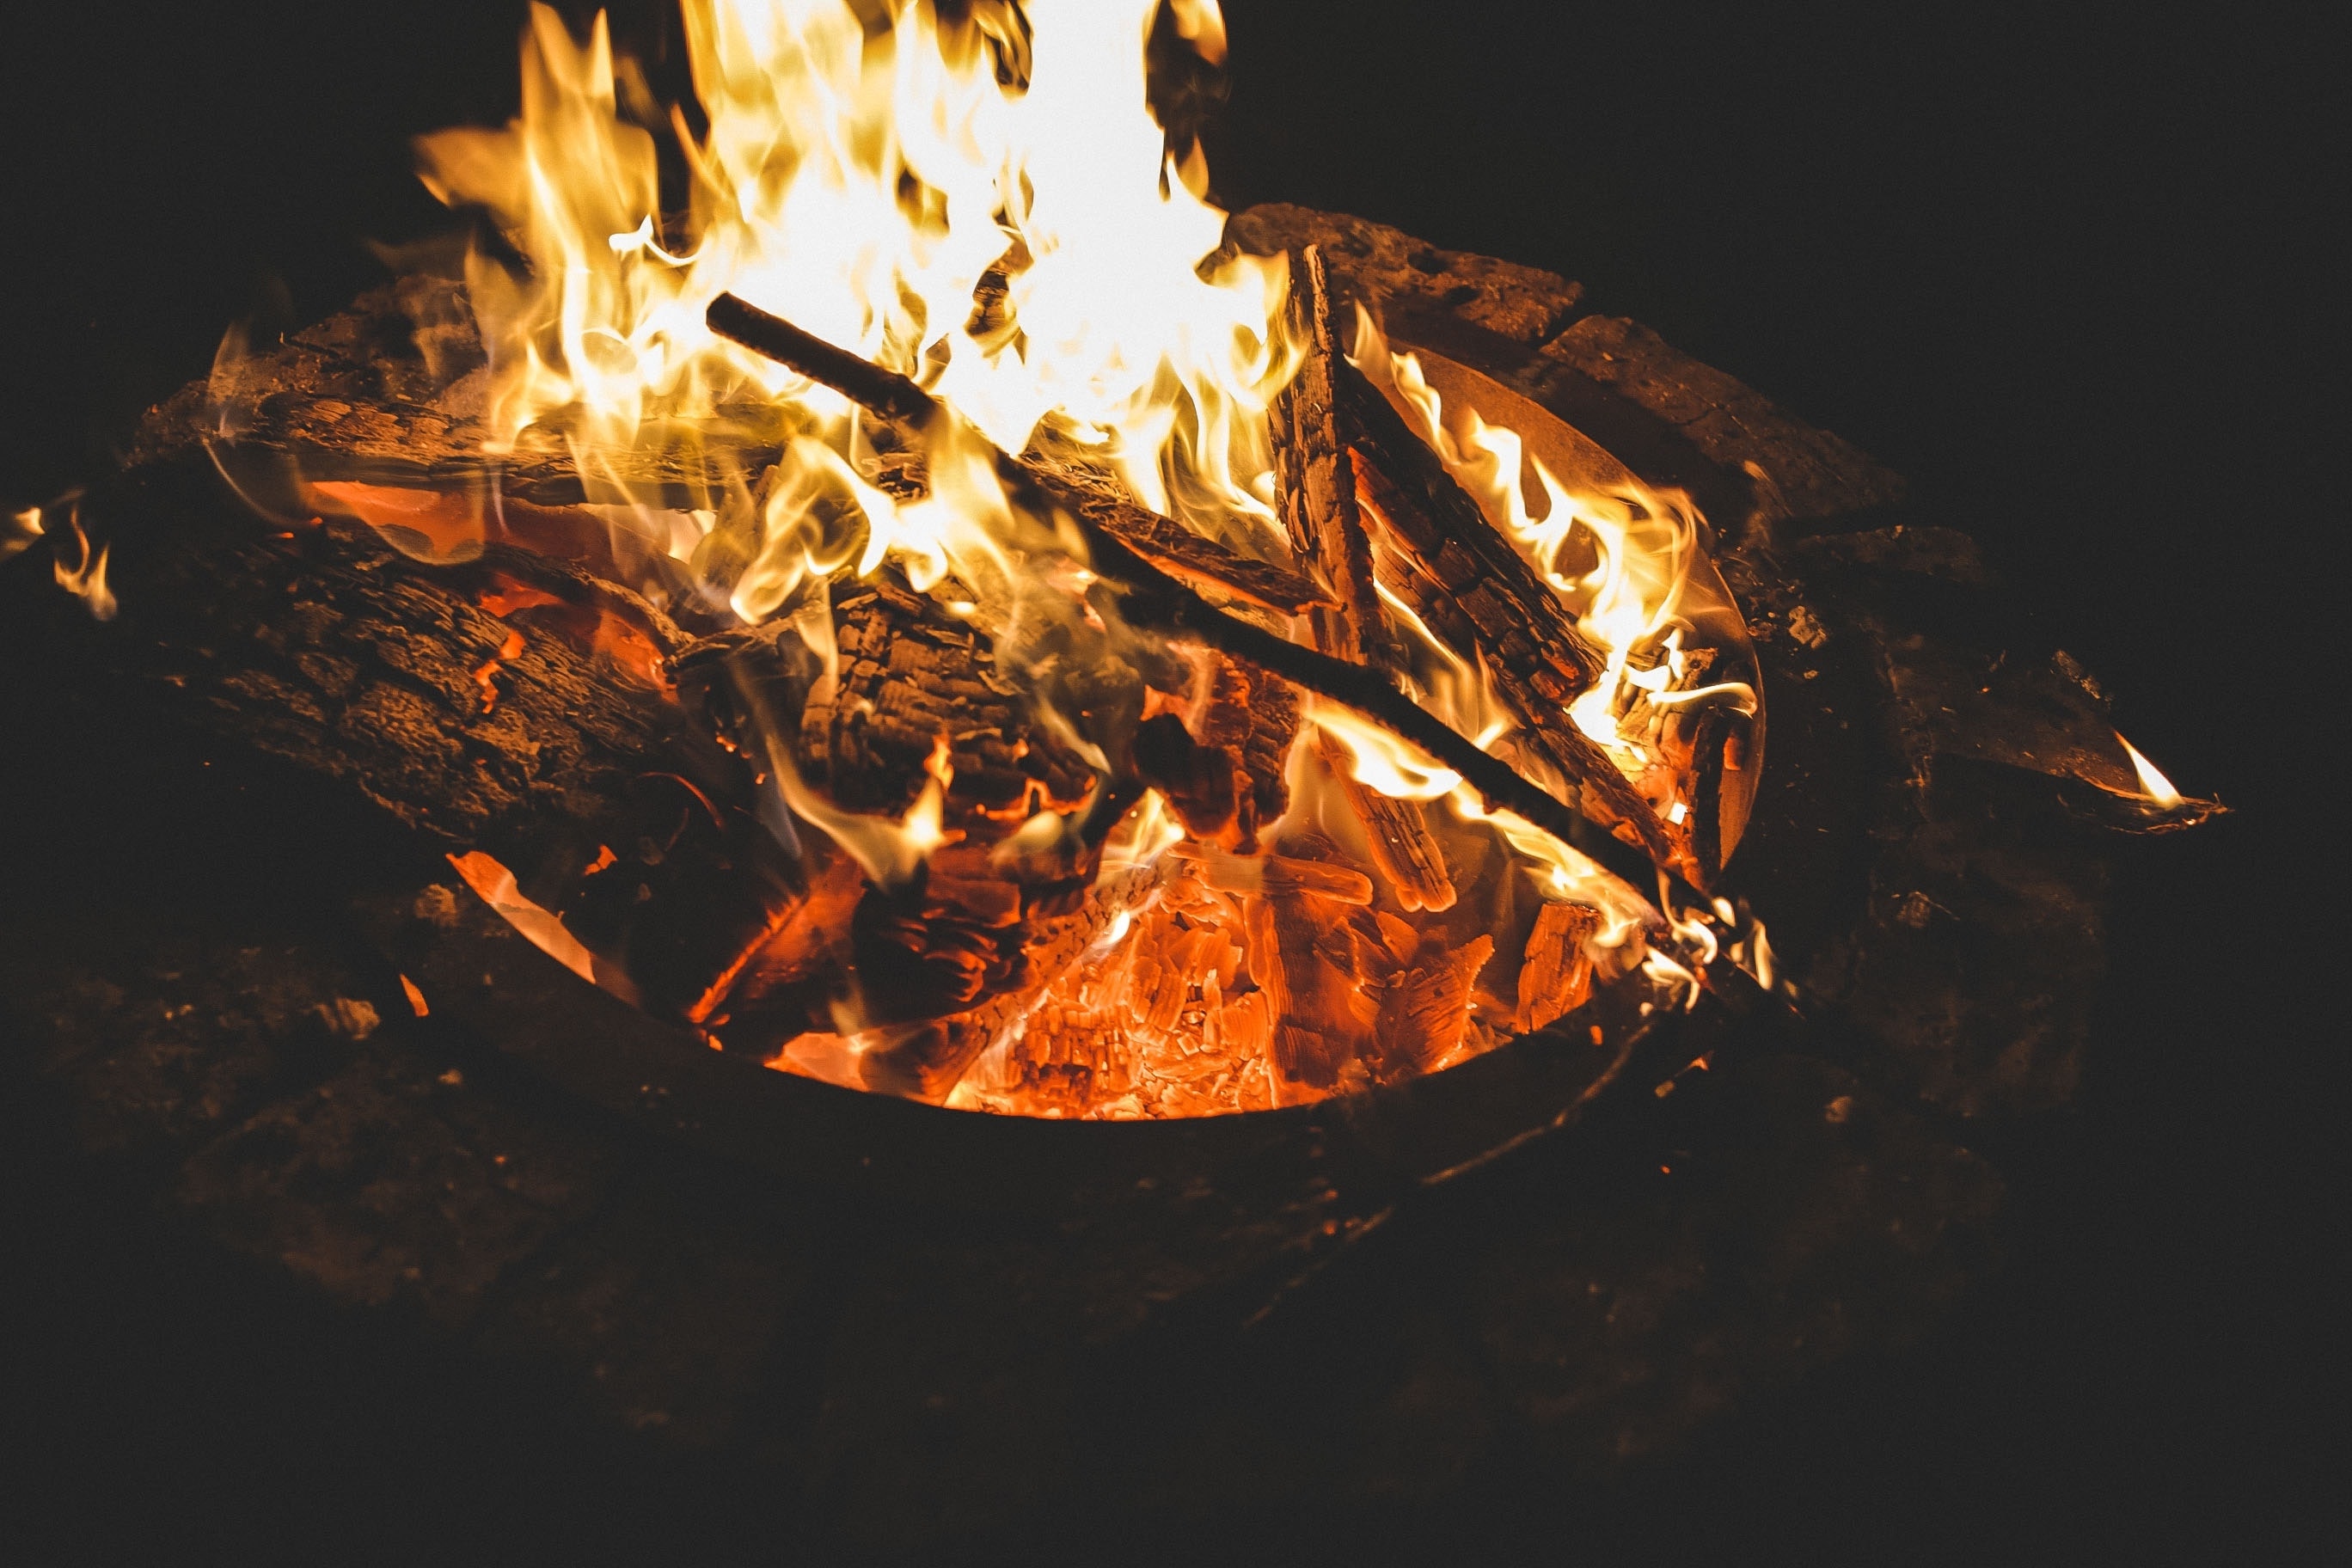 Wallpaper Flames, Firepit, Wood, Night, Warm, Ashes:2736x1824